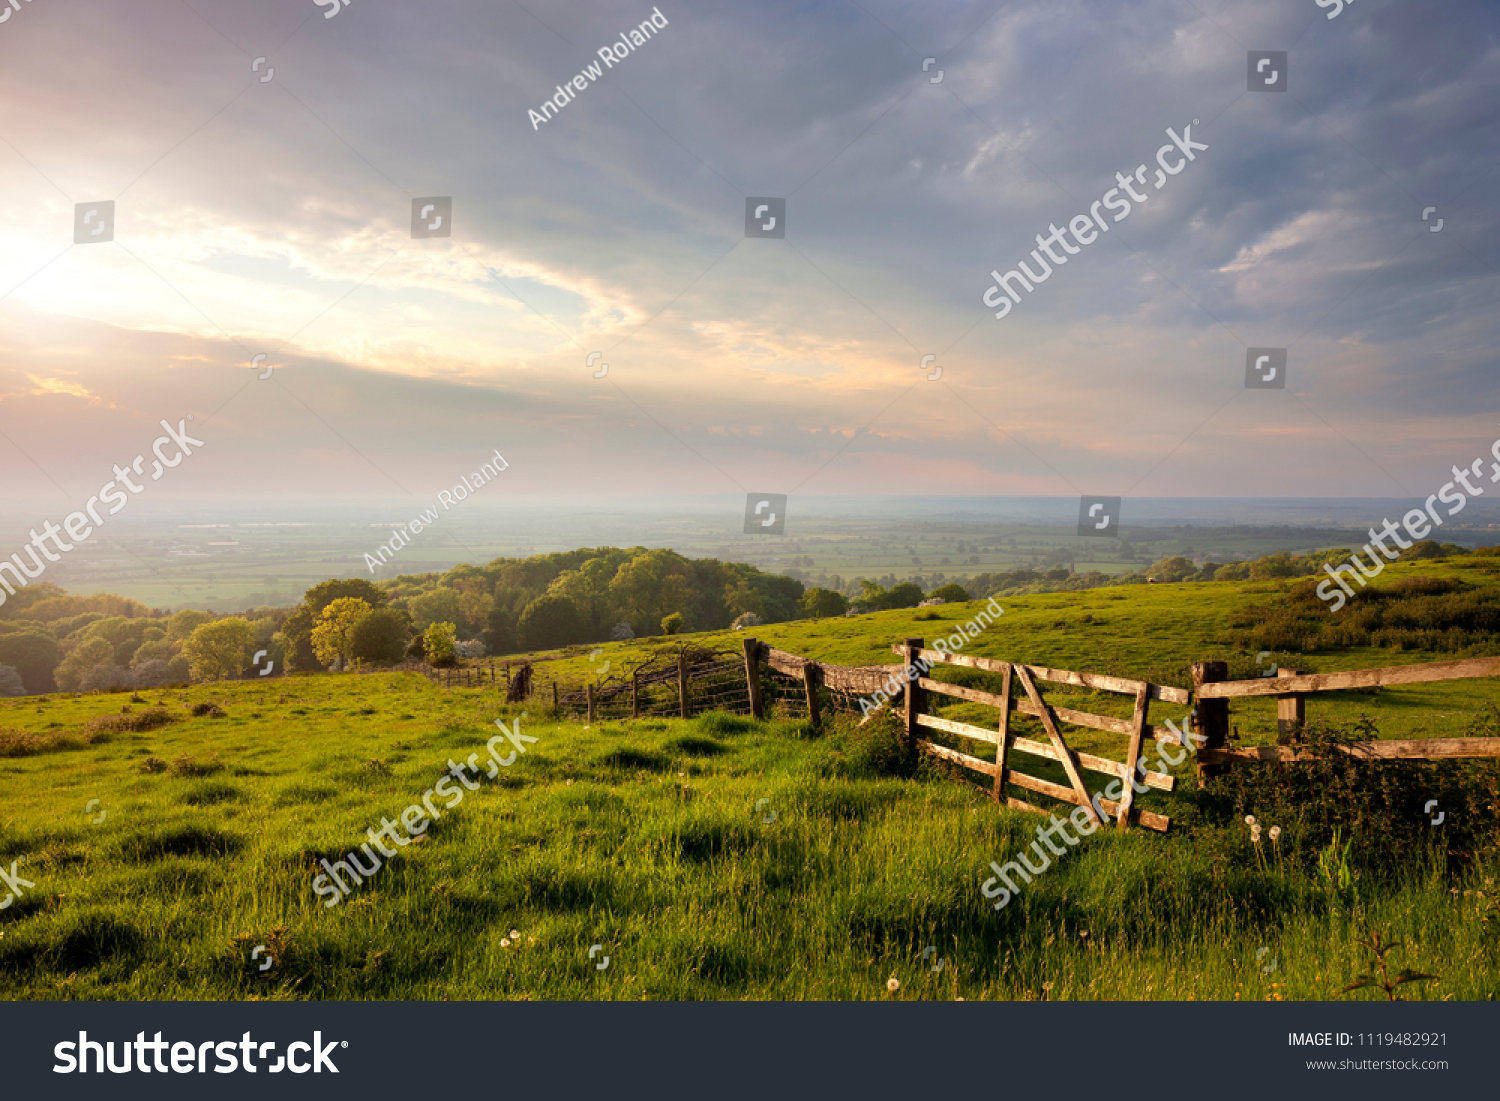 Evening time at Dover's Hill near Chipping Campden, Cotswolds, Gloucestershire, England. #1119482921